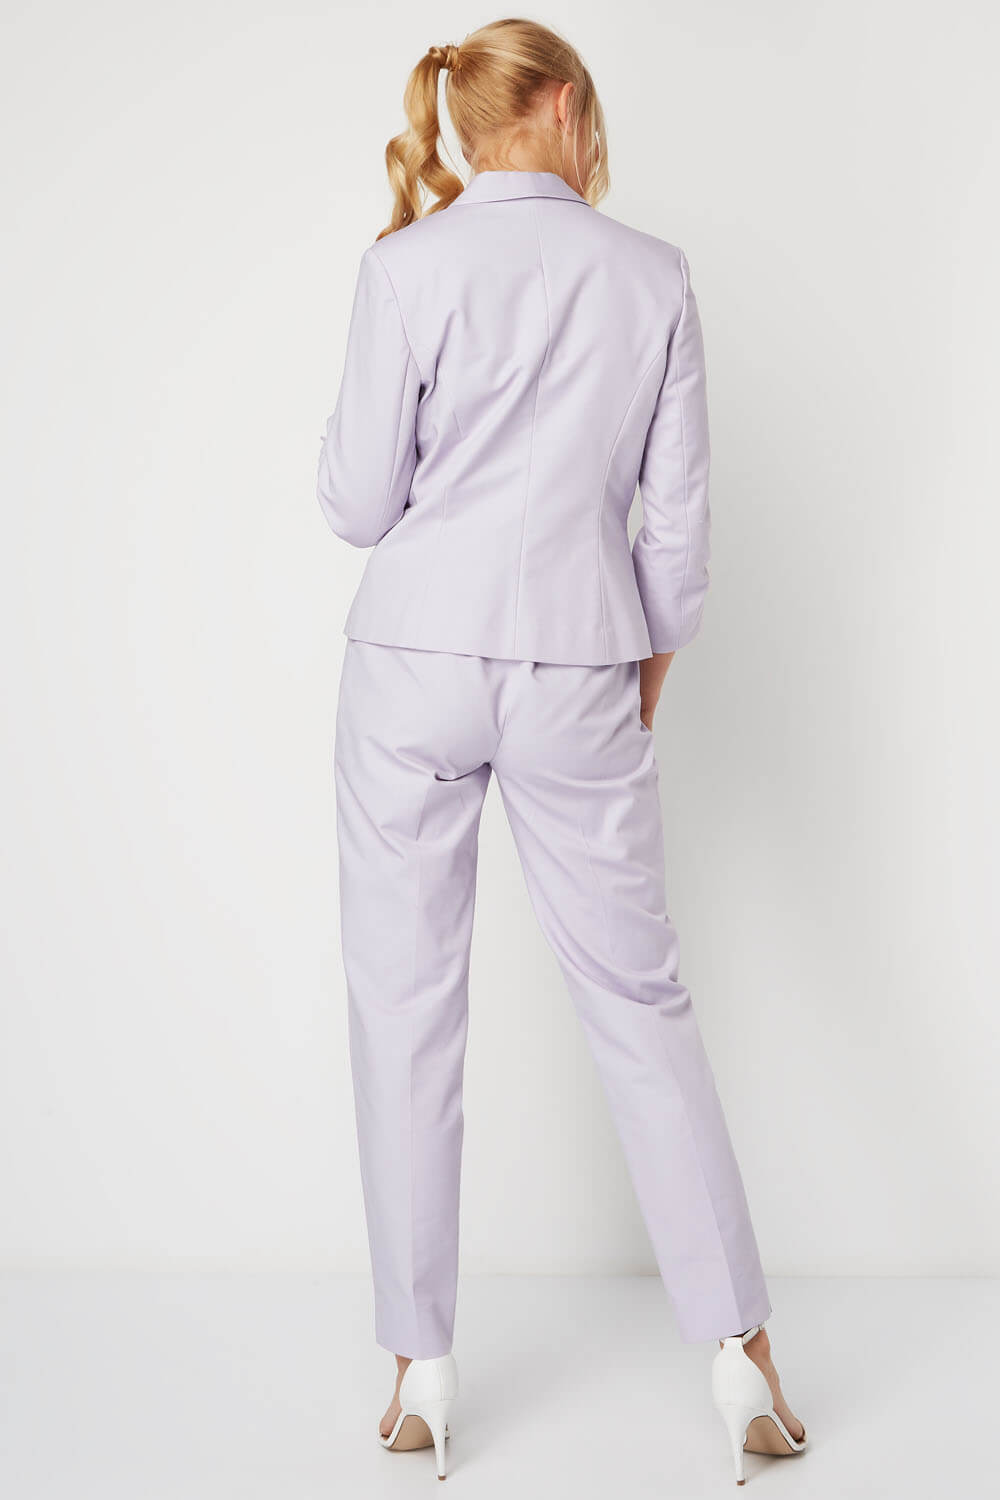 Lilac Ruched 3/4 Sleeve Jacket, Image 4 of 5